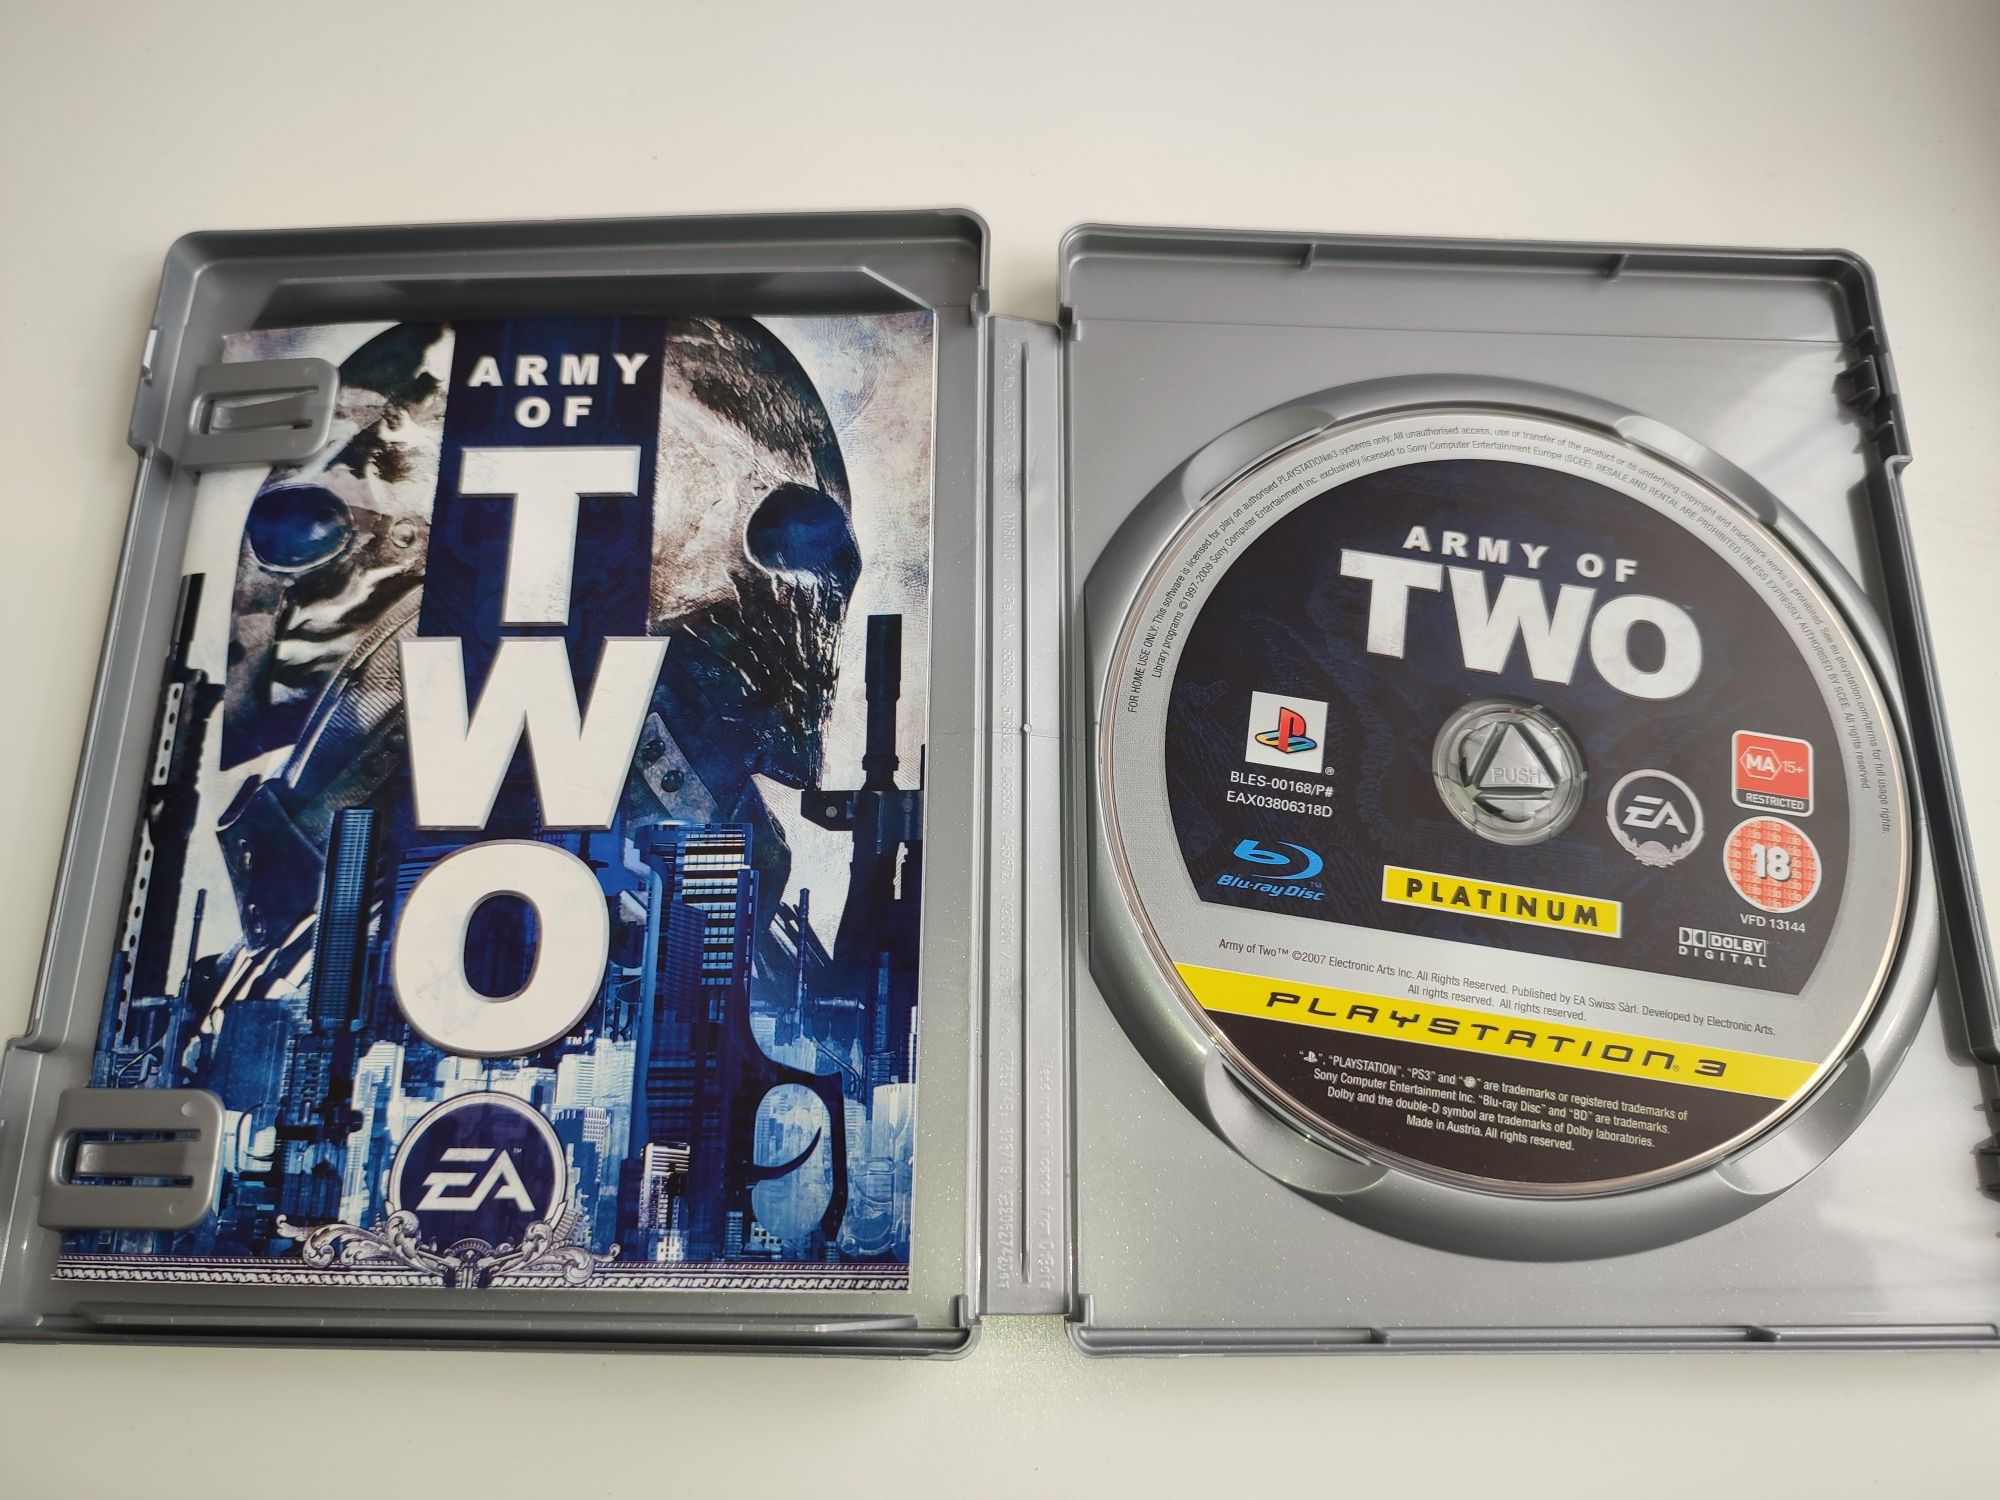 Gra Ps3 Army of Two Platinum gry PlayStation 3 Hit GTA V Sniper Diablo